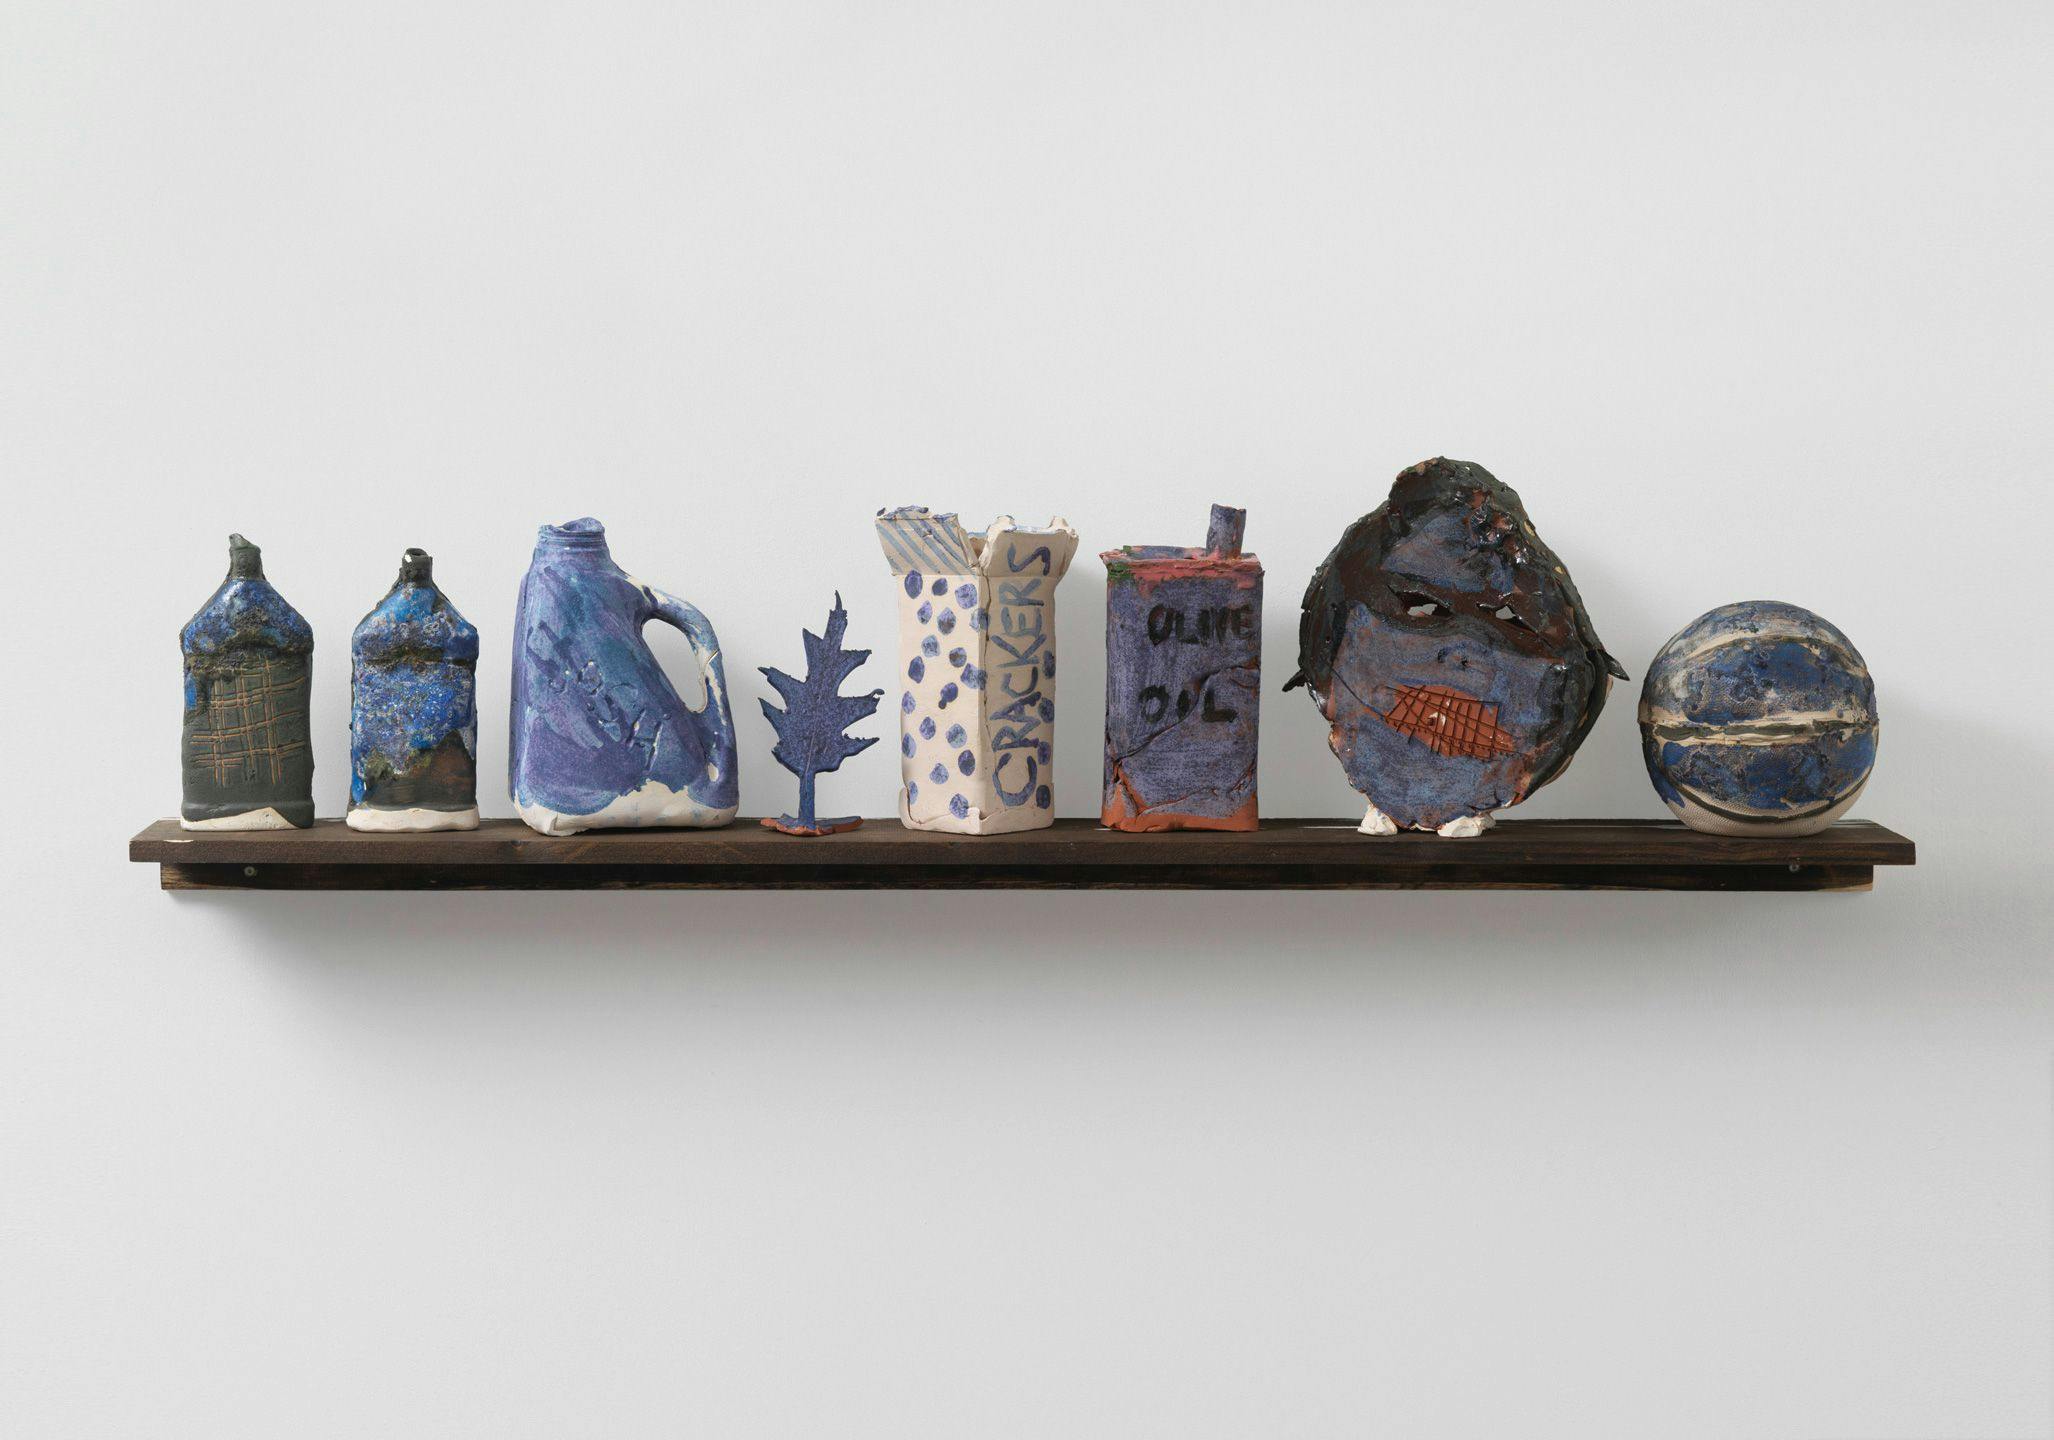 Eight untitled ceramic sculptures by Josh Smith, dated 2014.